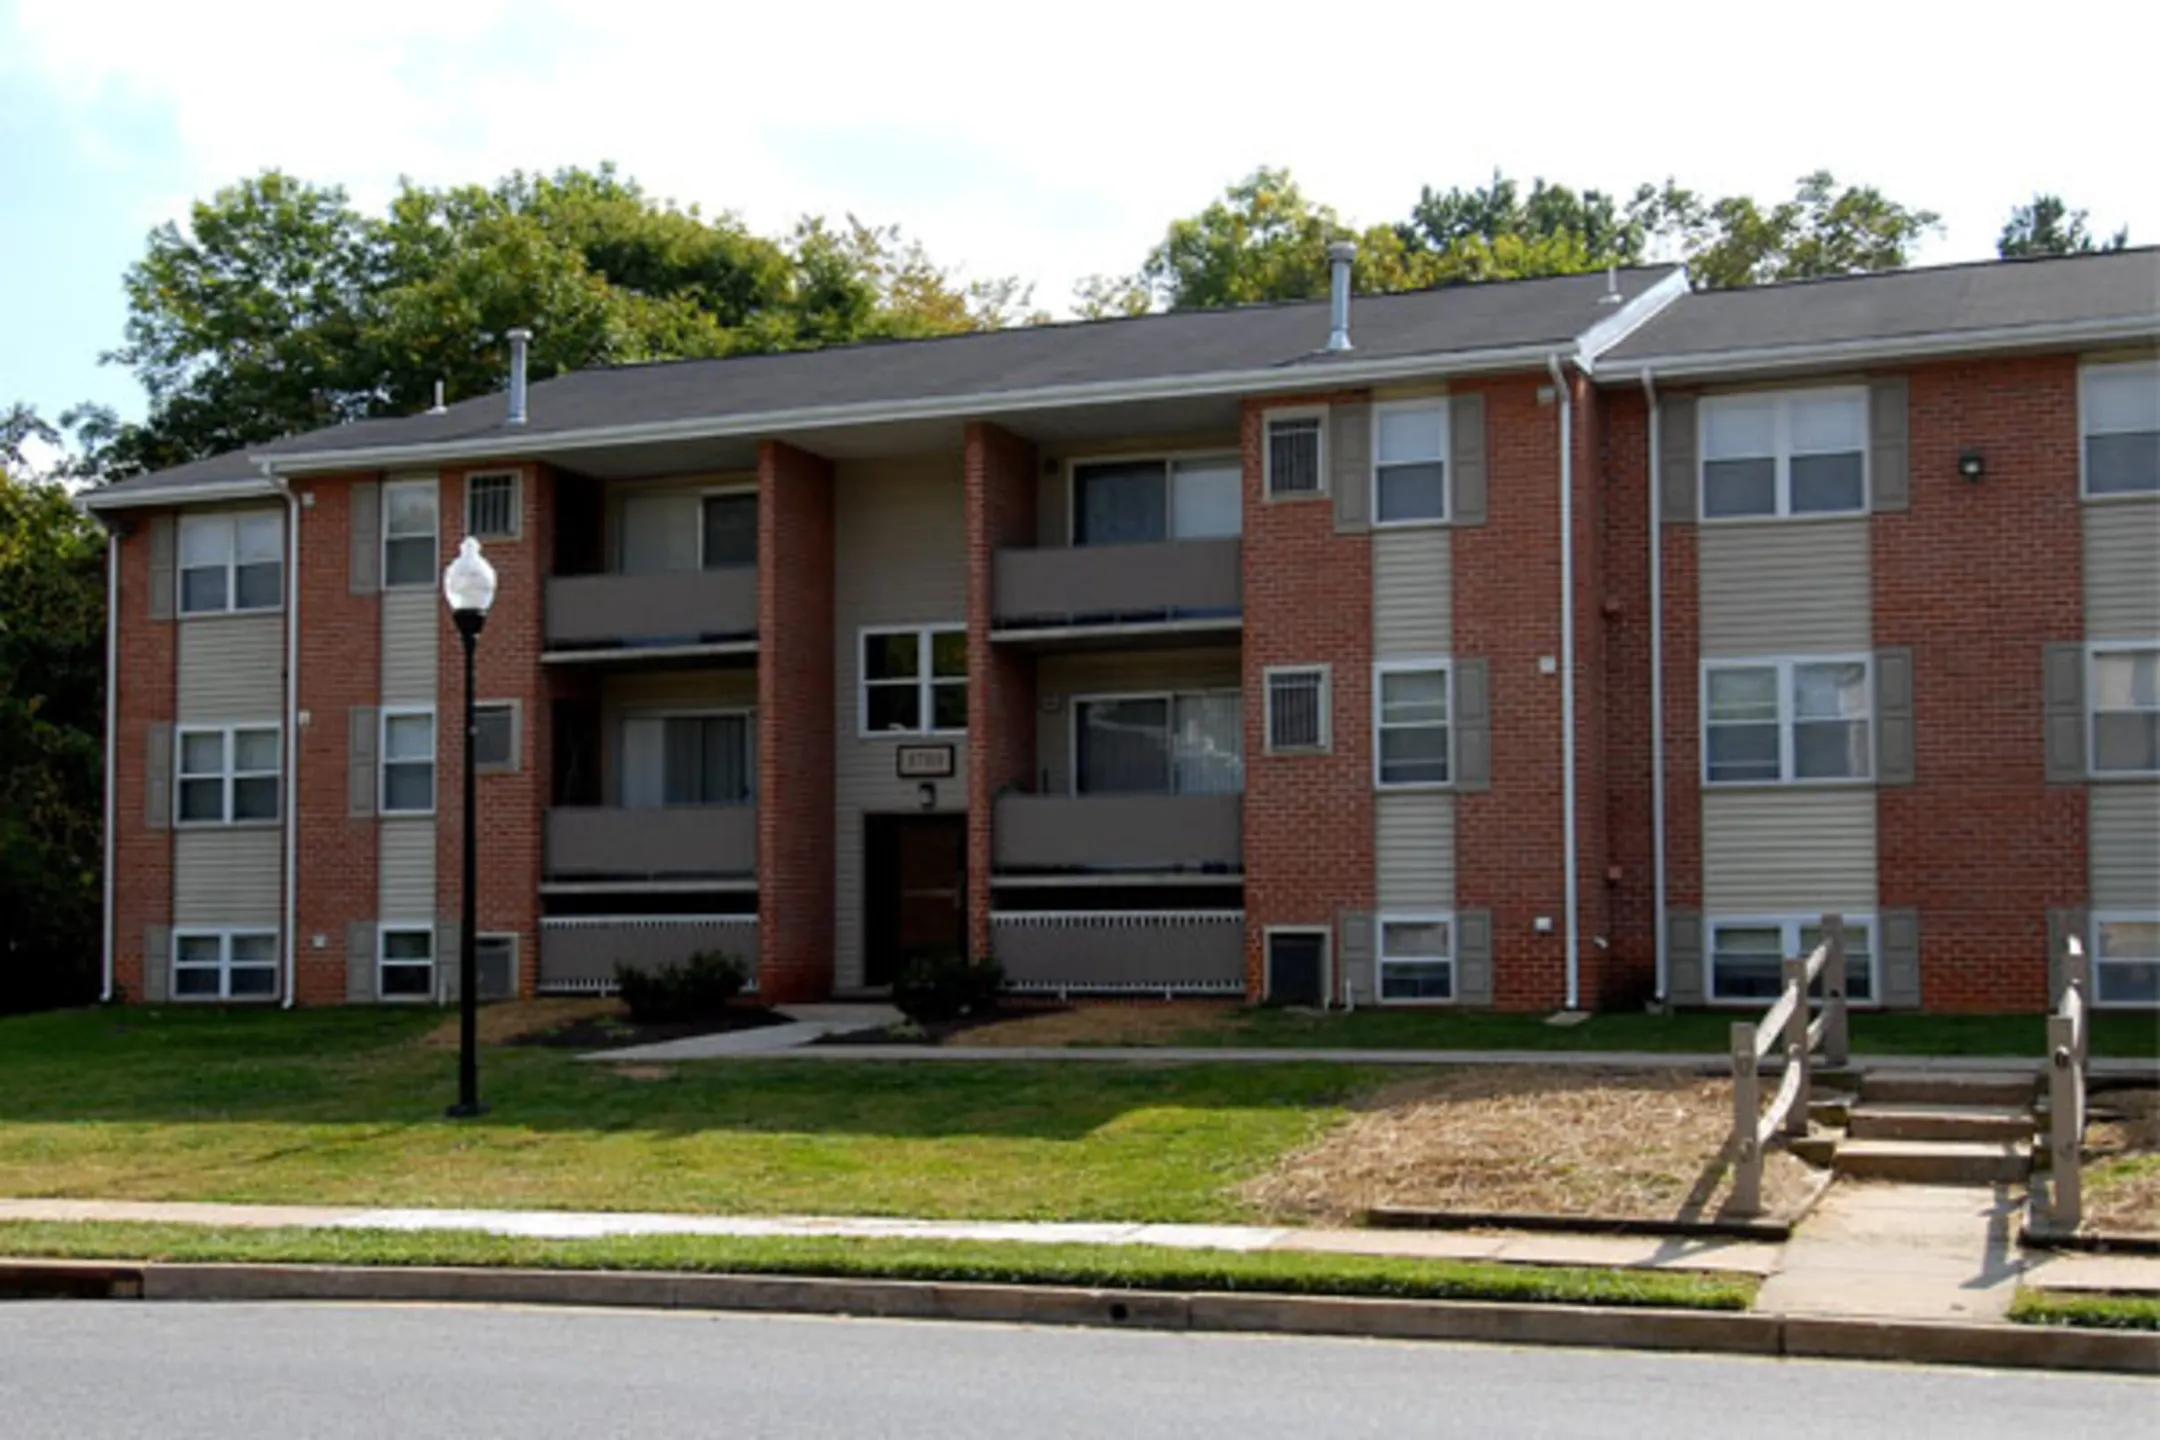 Building - Cedar Gardens & Towers Apartments & Townhomes - Windsor Mill, MD